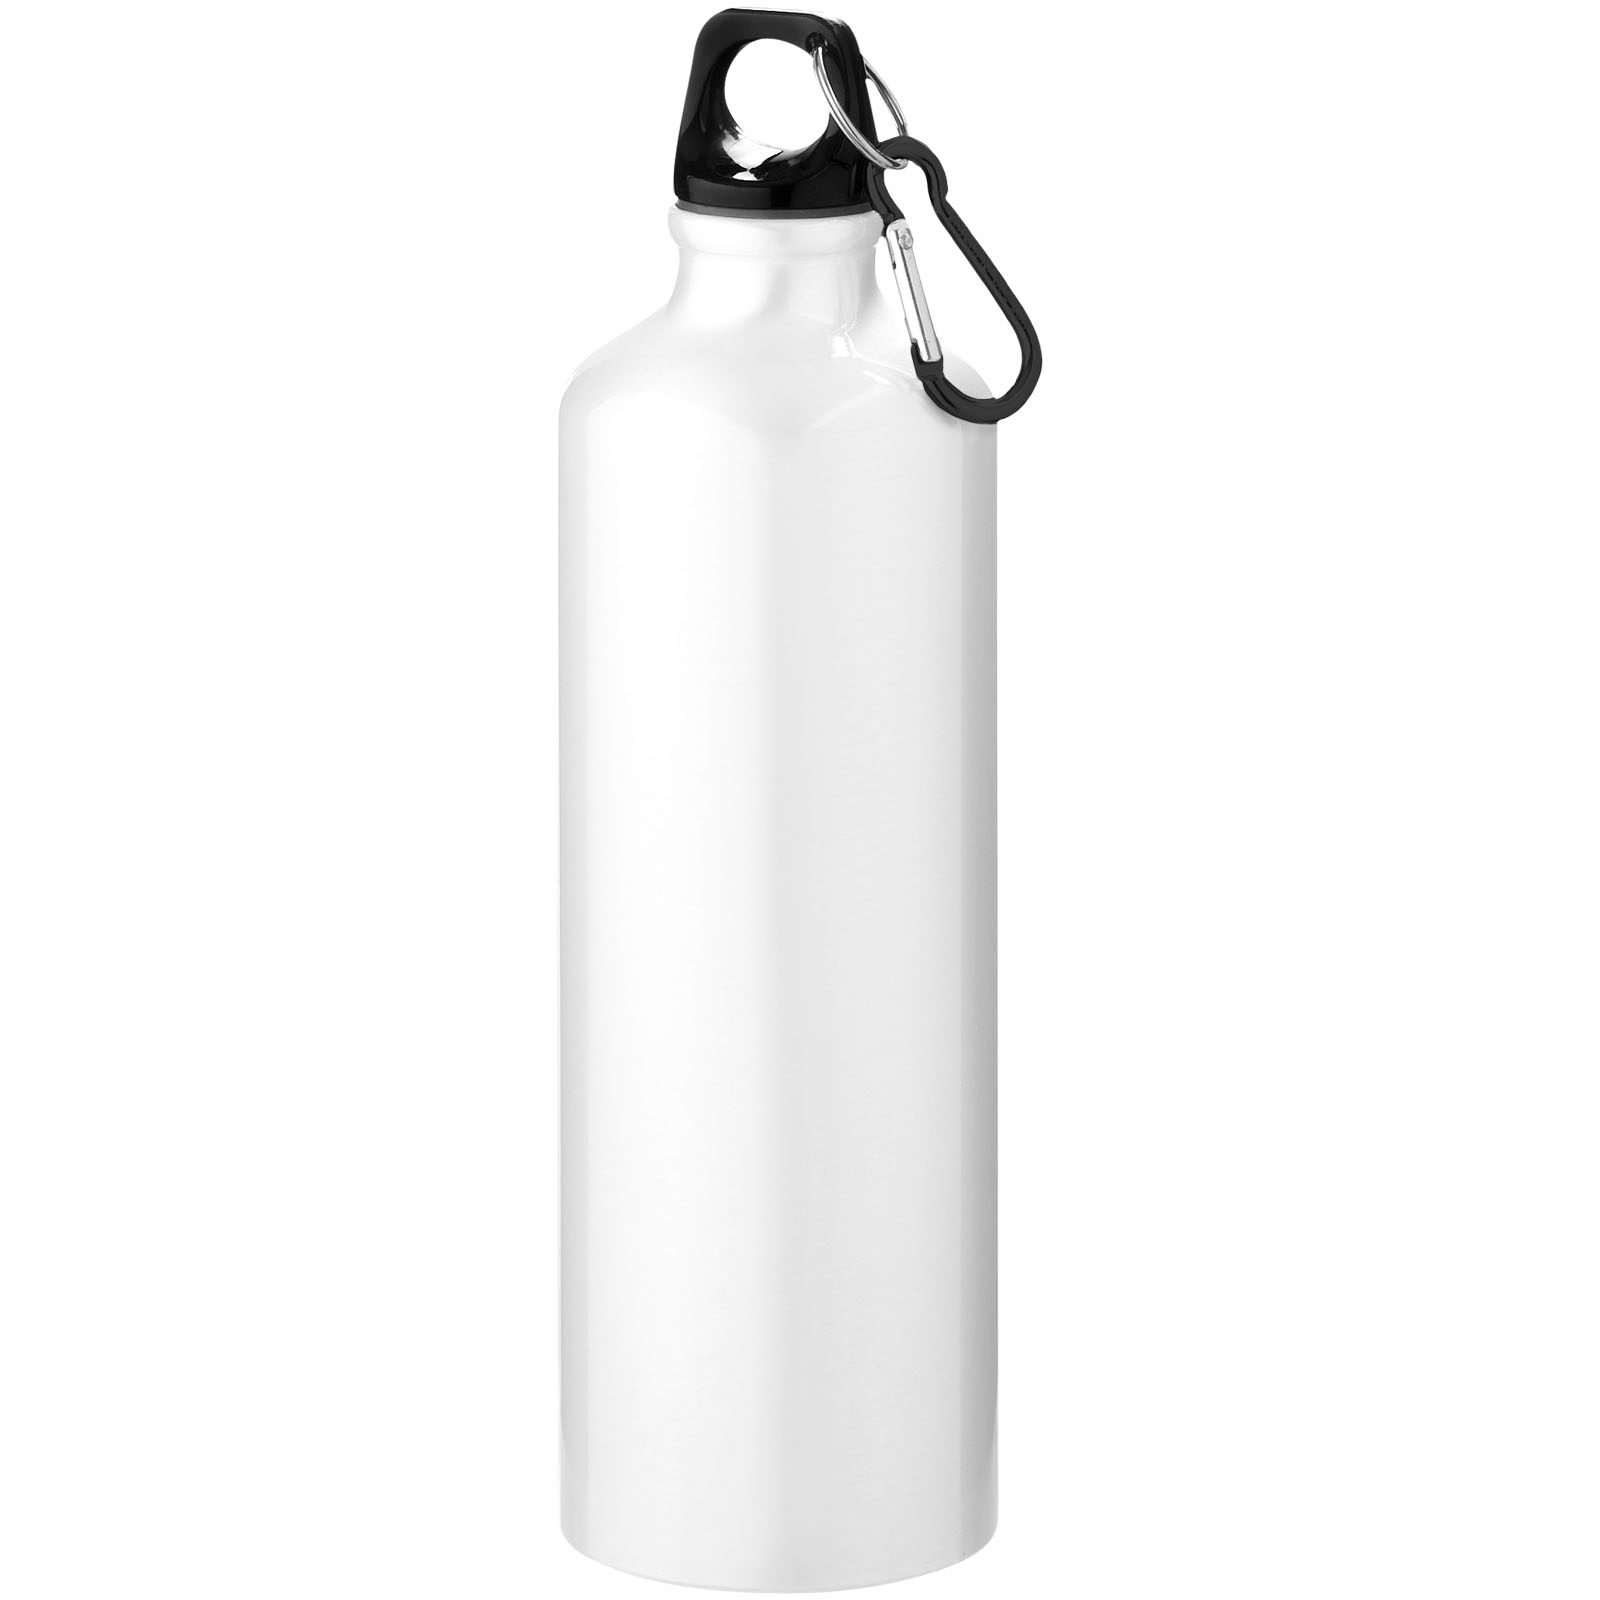 Advertising Water bottles - Oregon 770 ml RCS certified recycled aluminium water bottle with carabiner - 0